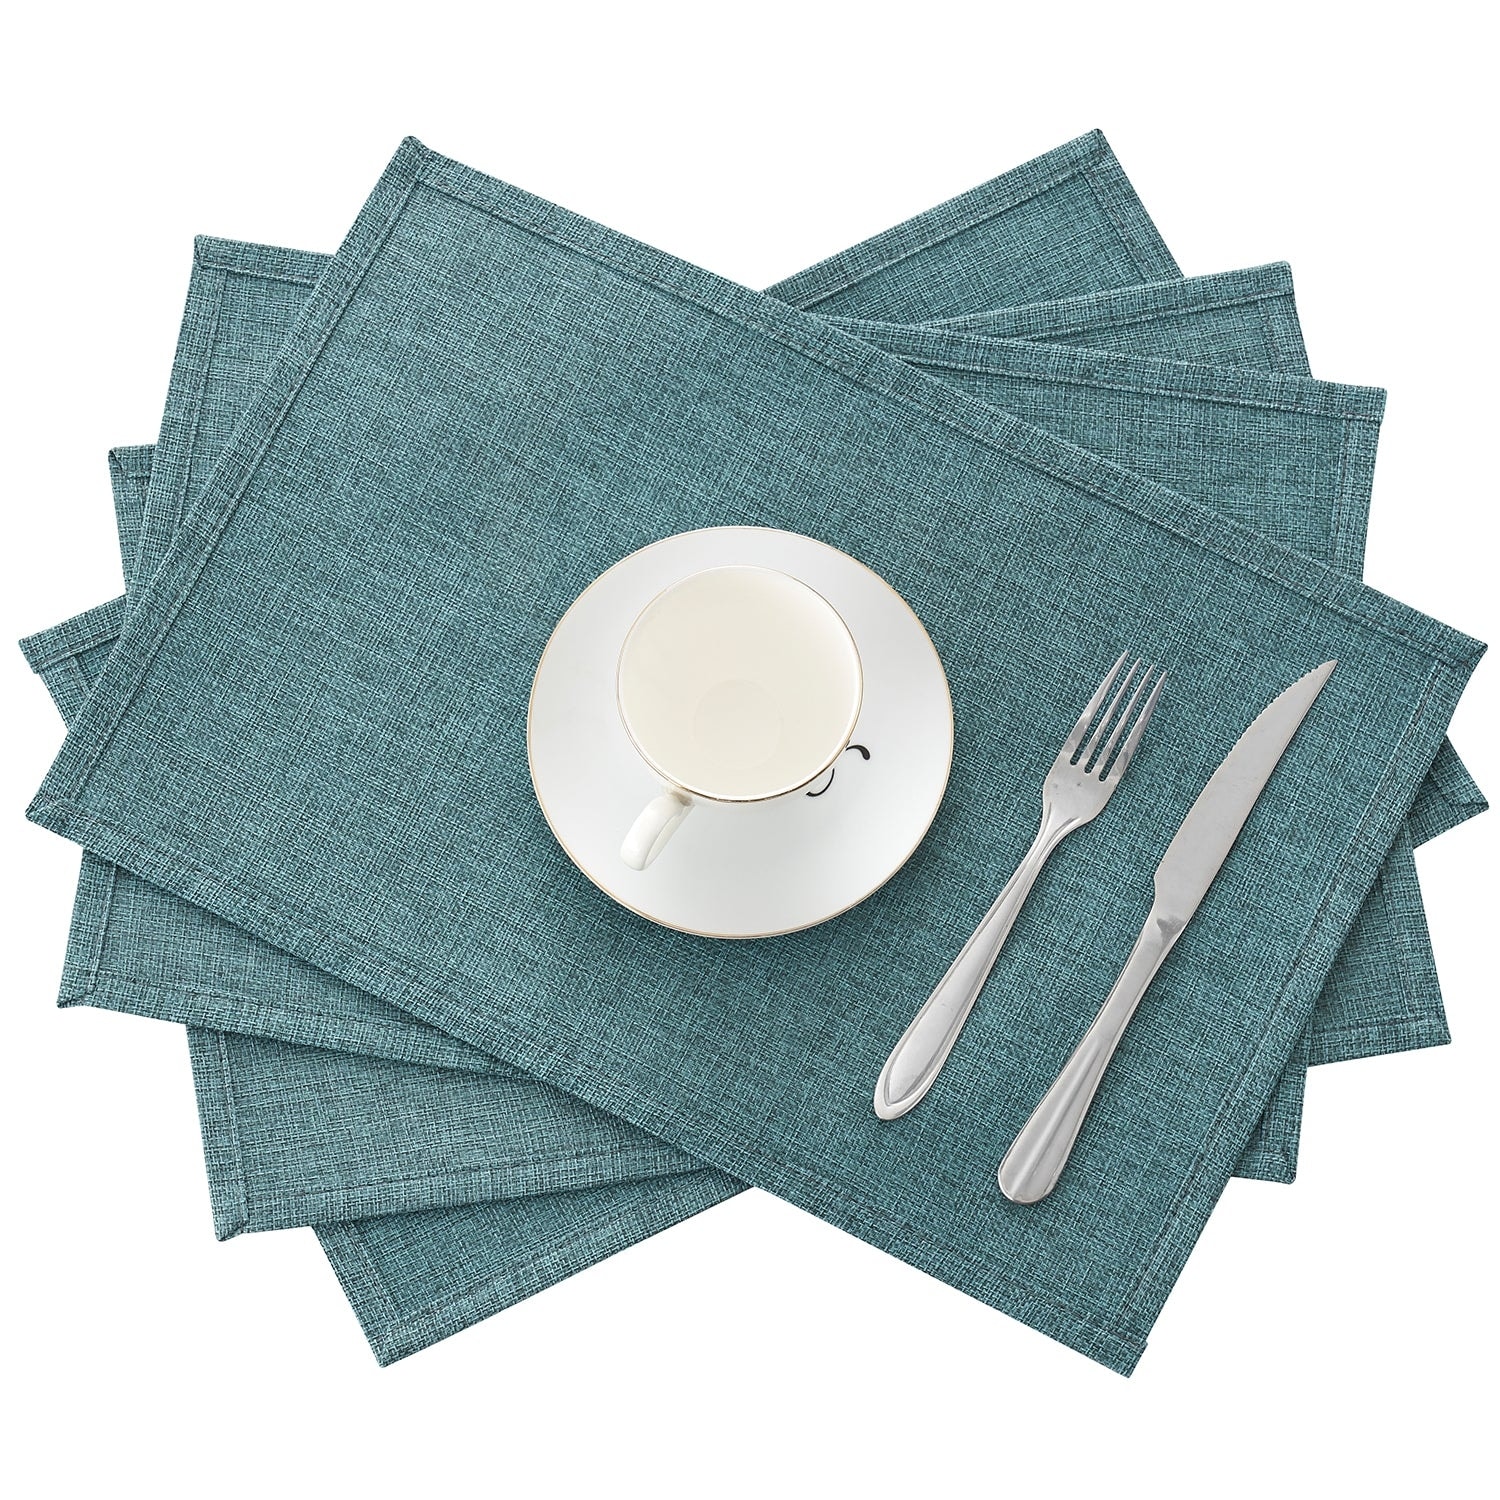 Linen Placemats Set of 4, Heat Resistant Dining Table Place Mats